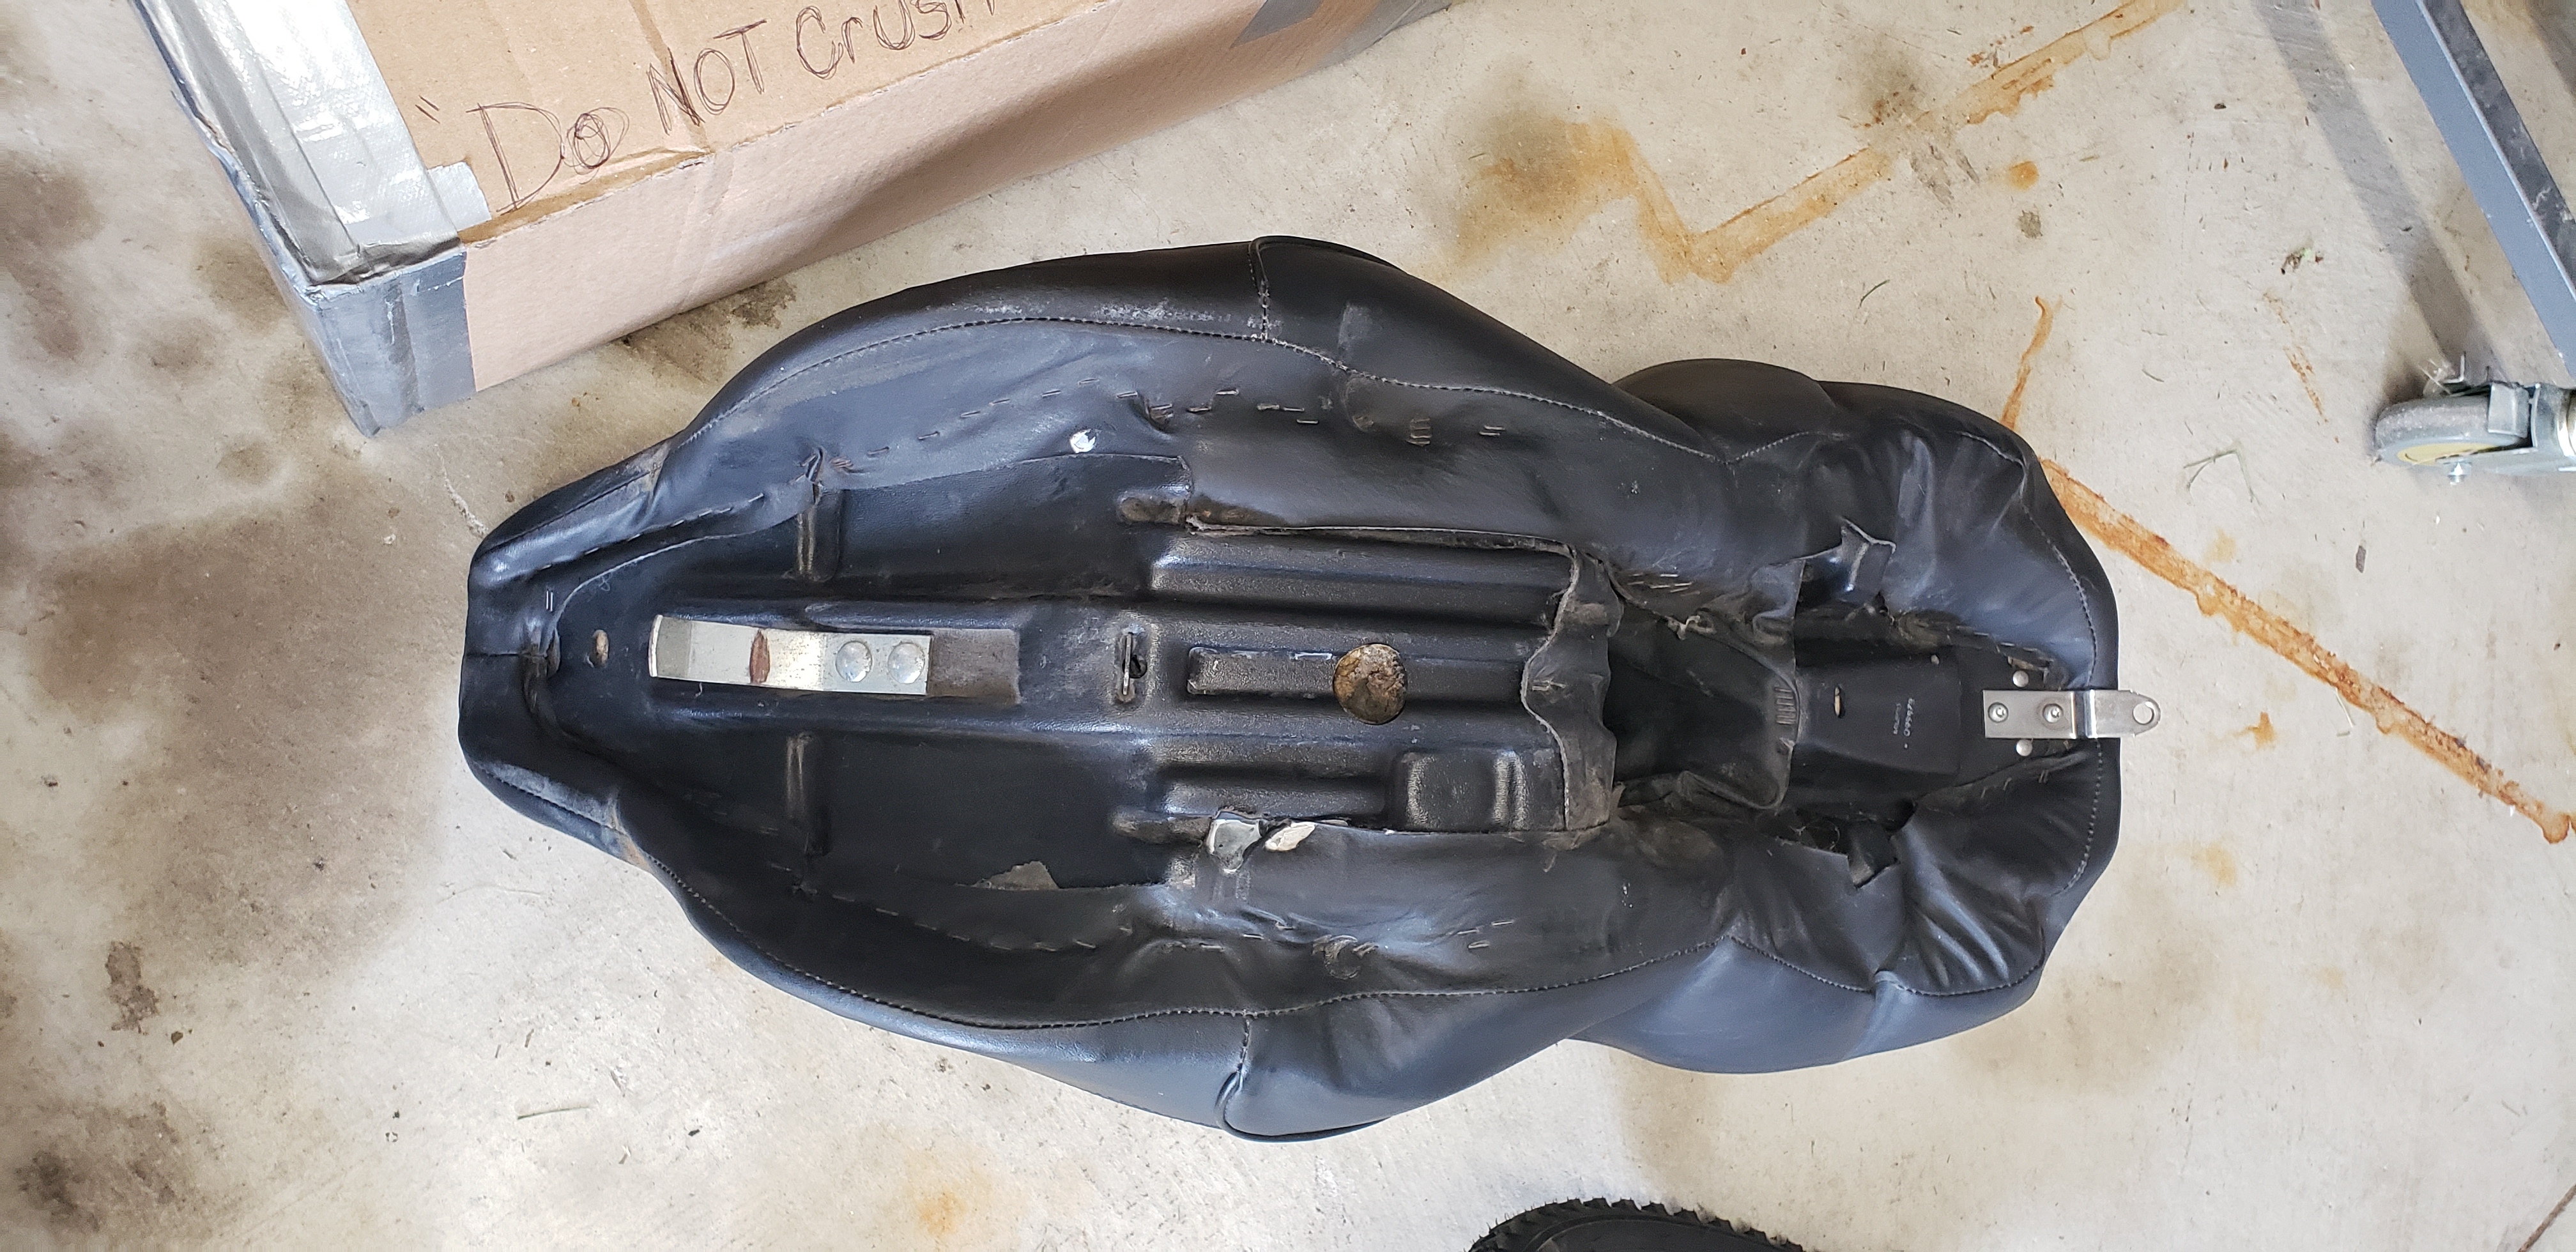 Touring seat from 2000 Electra Glide - Harley Davidson Forums